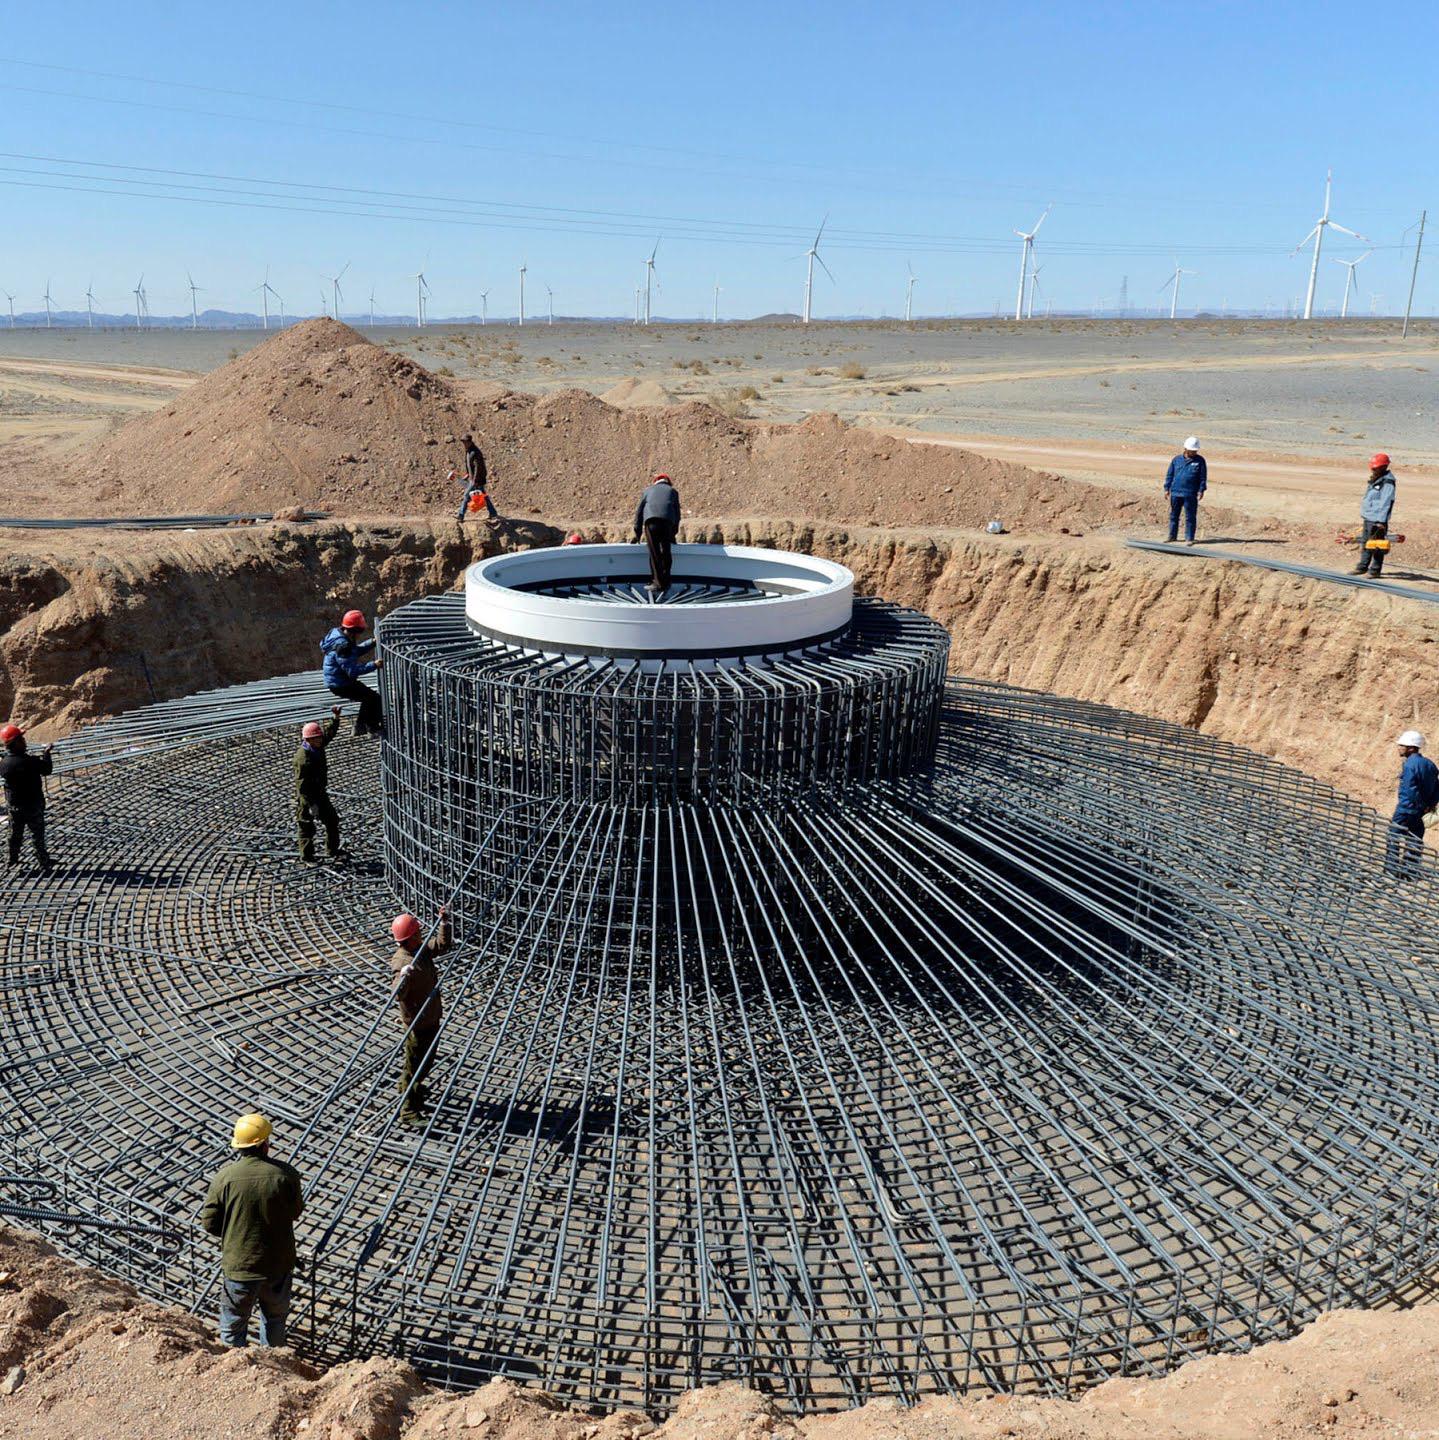 A windmill being installed in Xinjiang